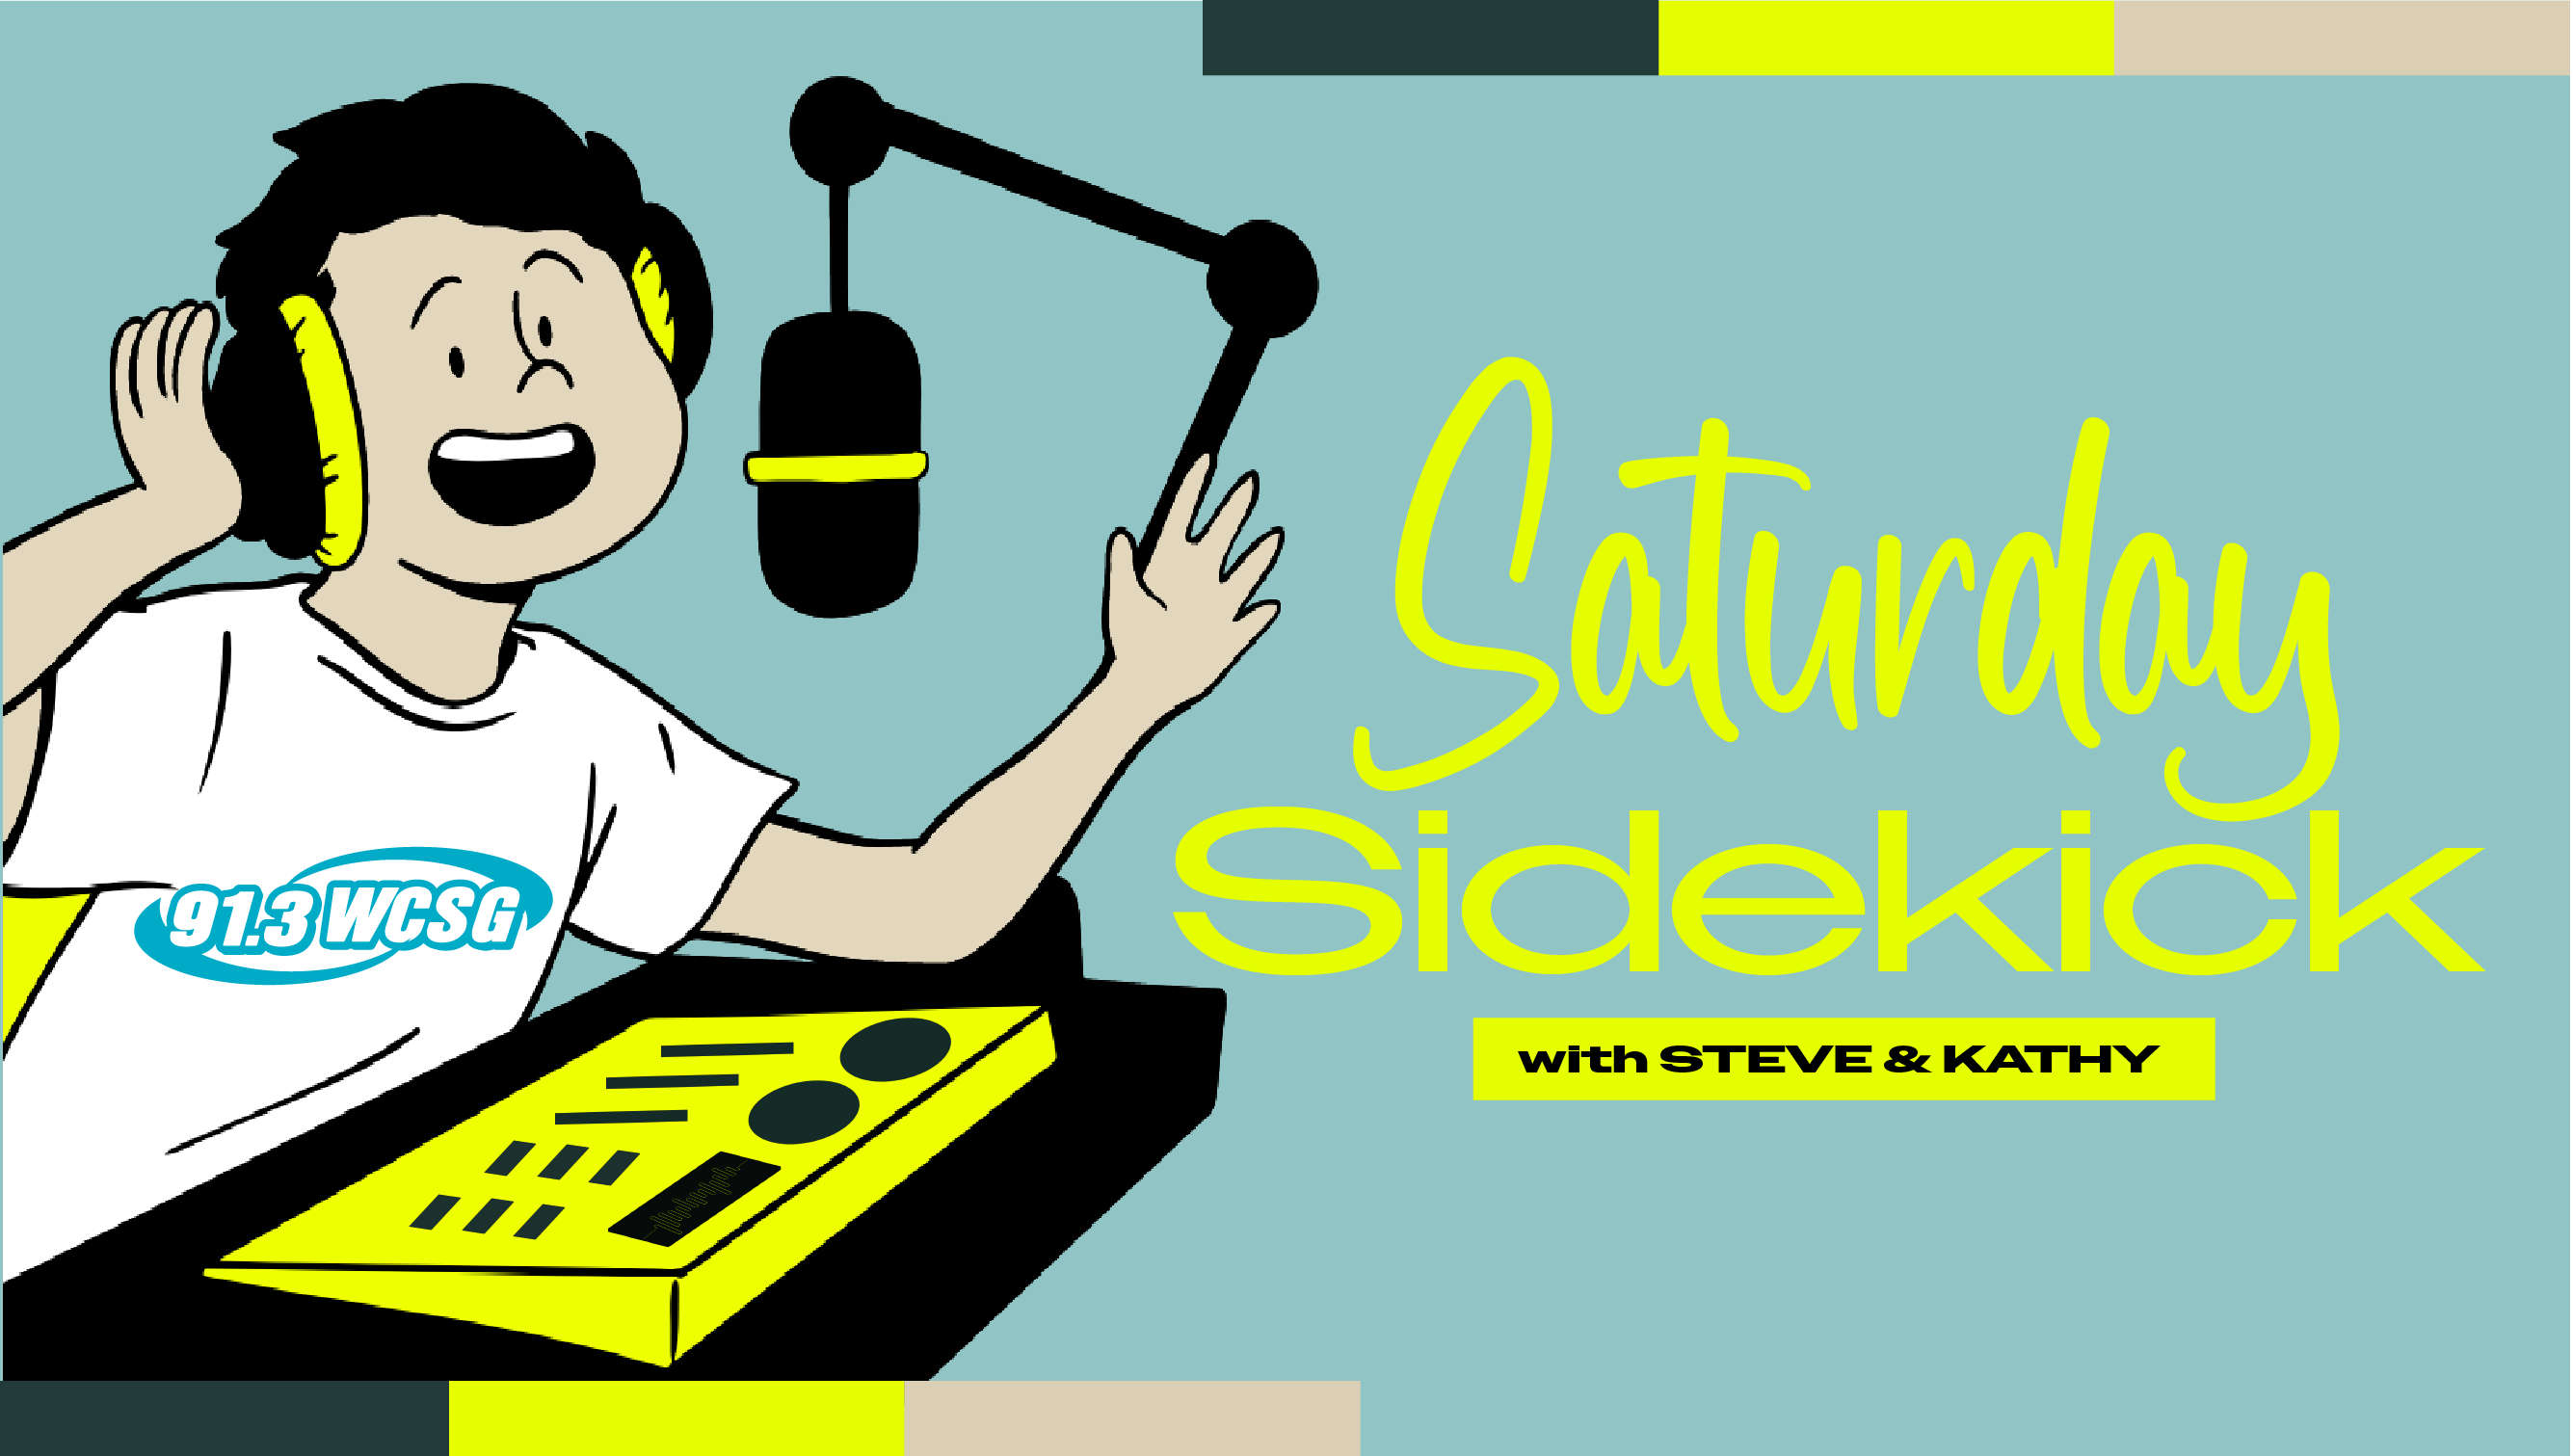 91.3 WCSG Sidekick Saturday with Steve and Kathy.